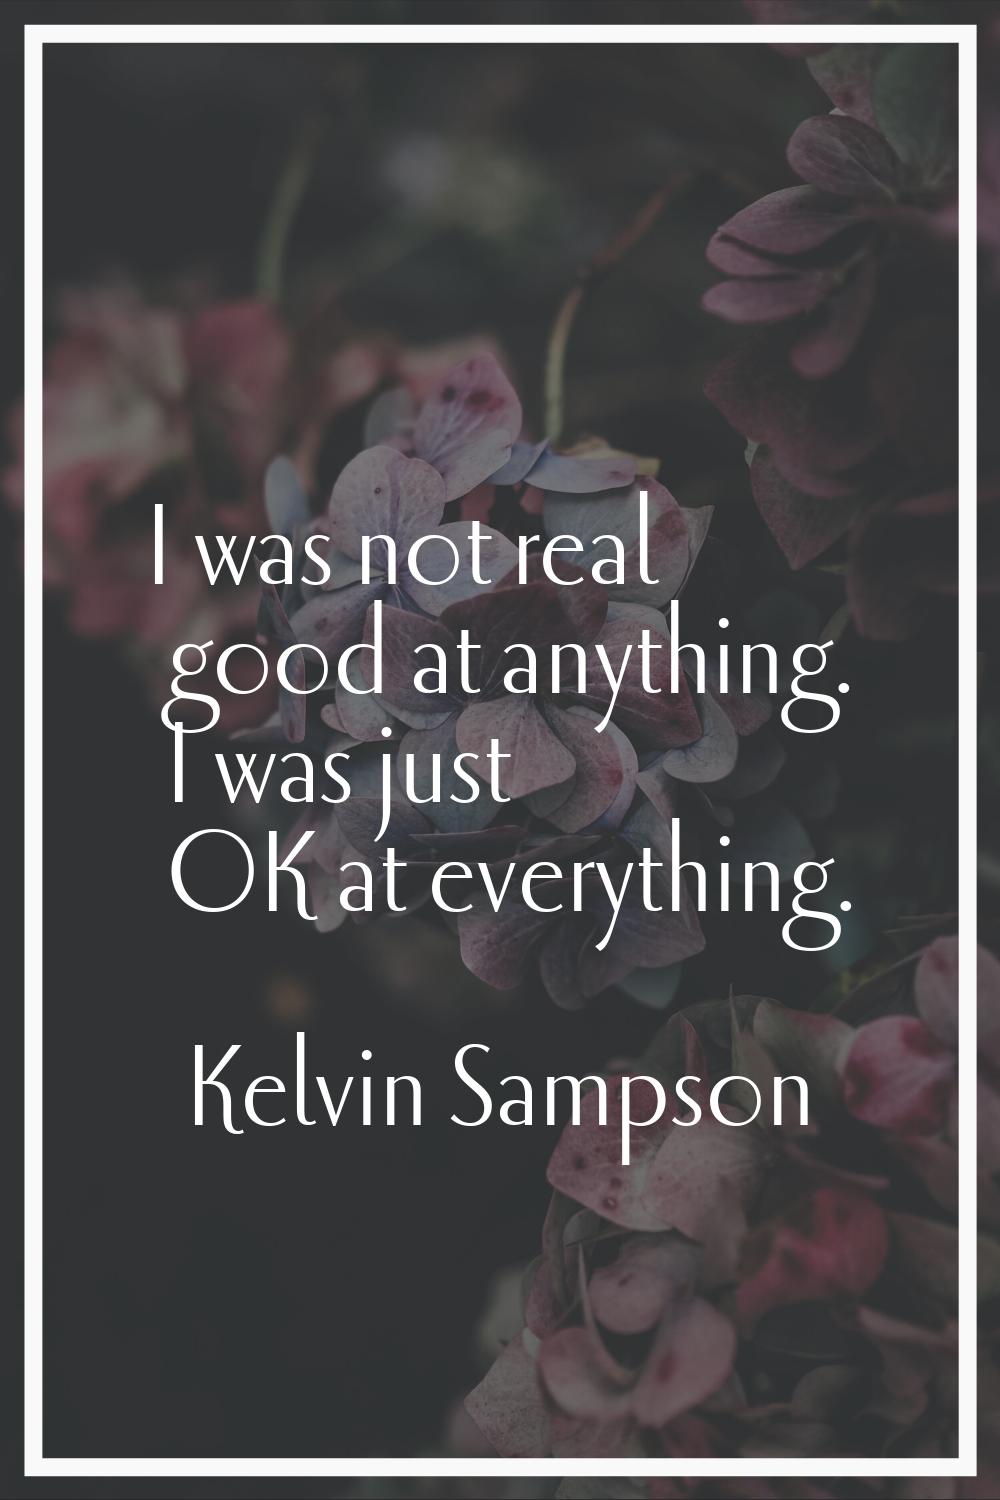 I was not real good at anything. I was just OK at everything.